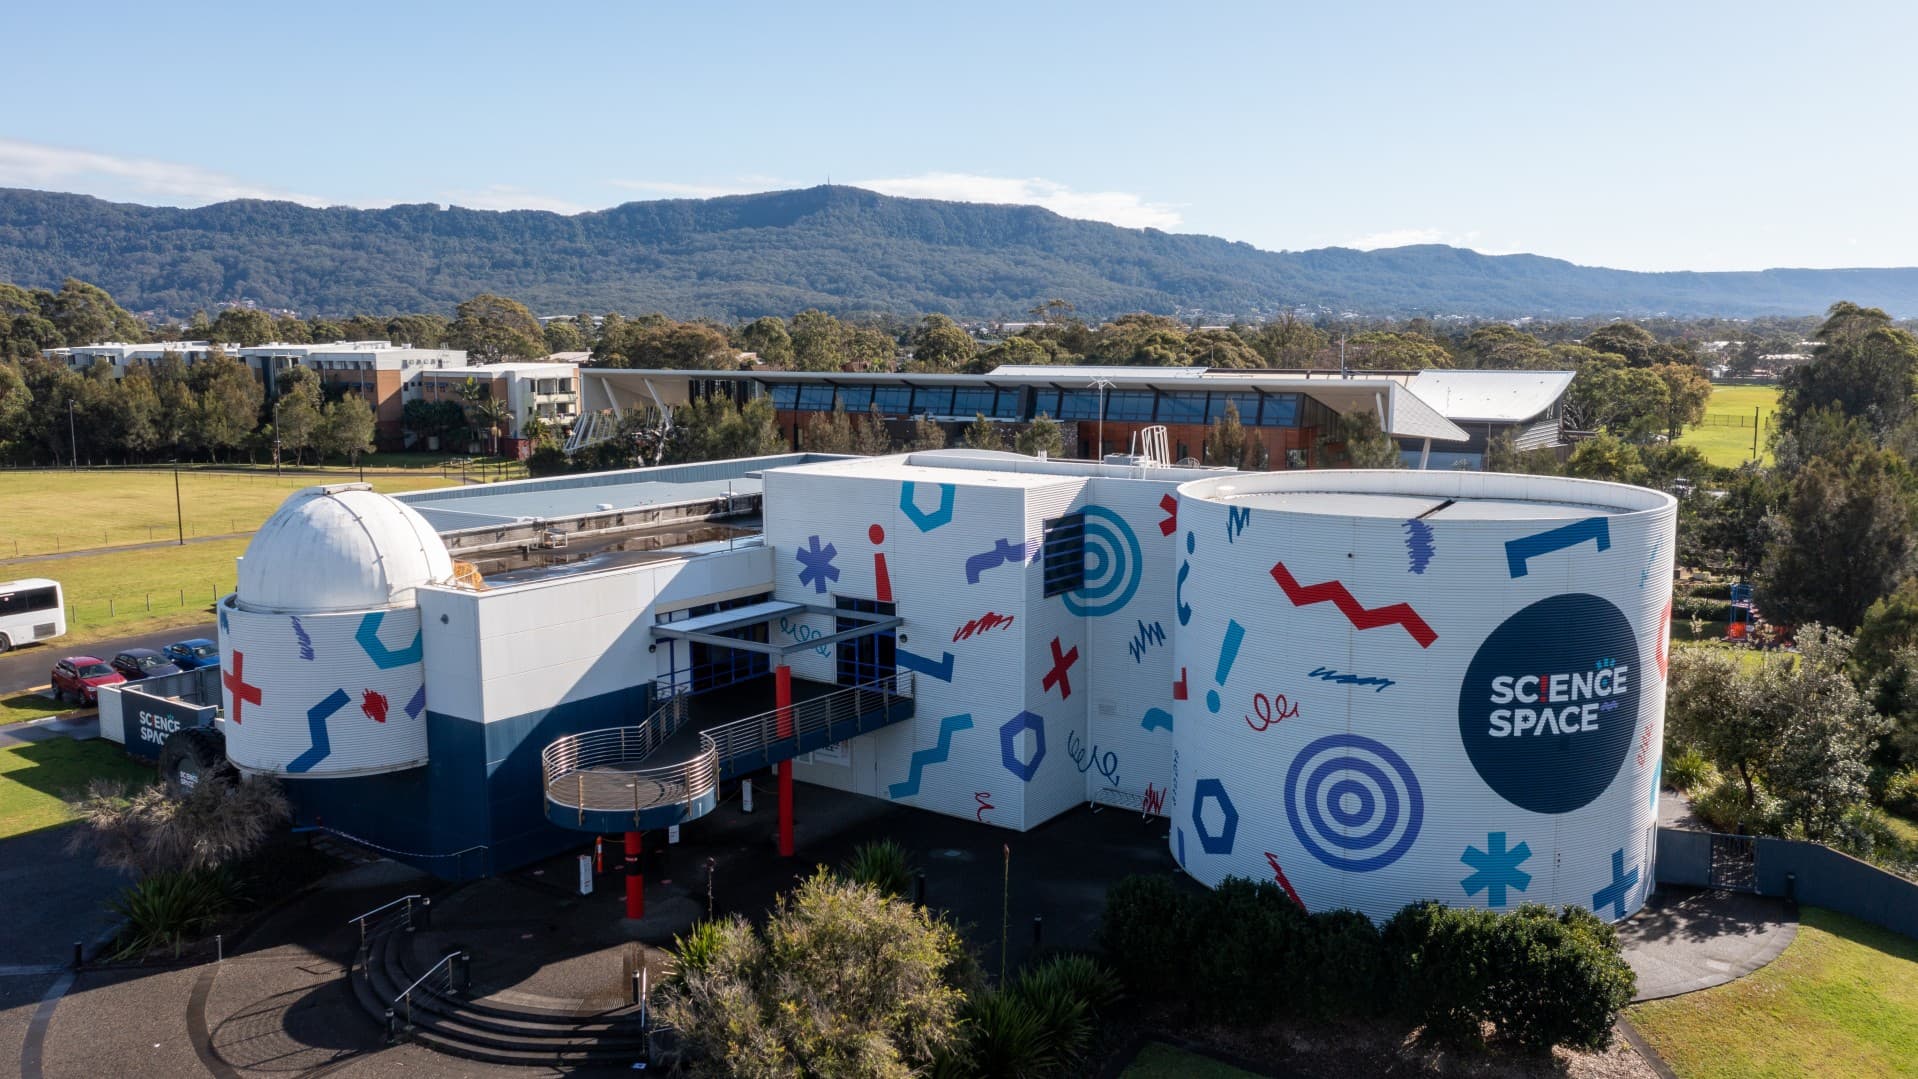 The Science Space building, on Innovation Campus, is pictured from the air. It is painted white and covered in blue, purple and red symbols. Photo: Tourism Australia